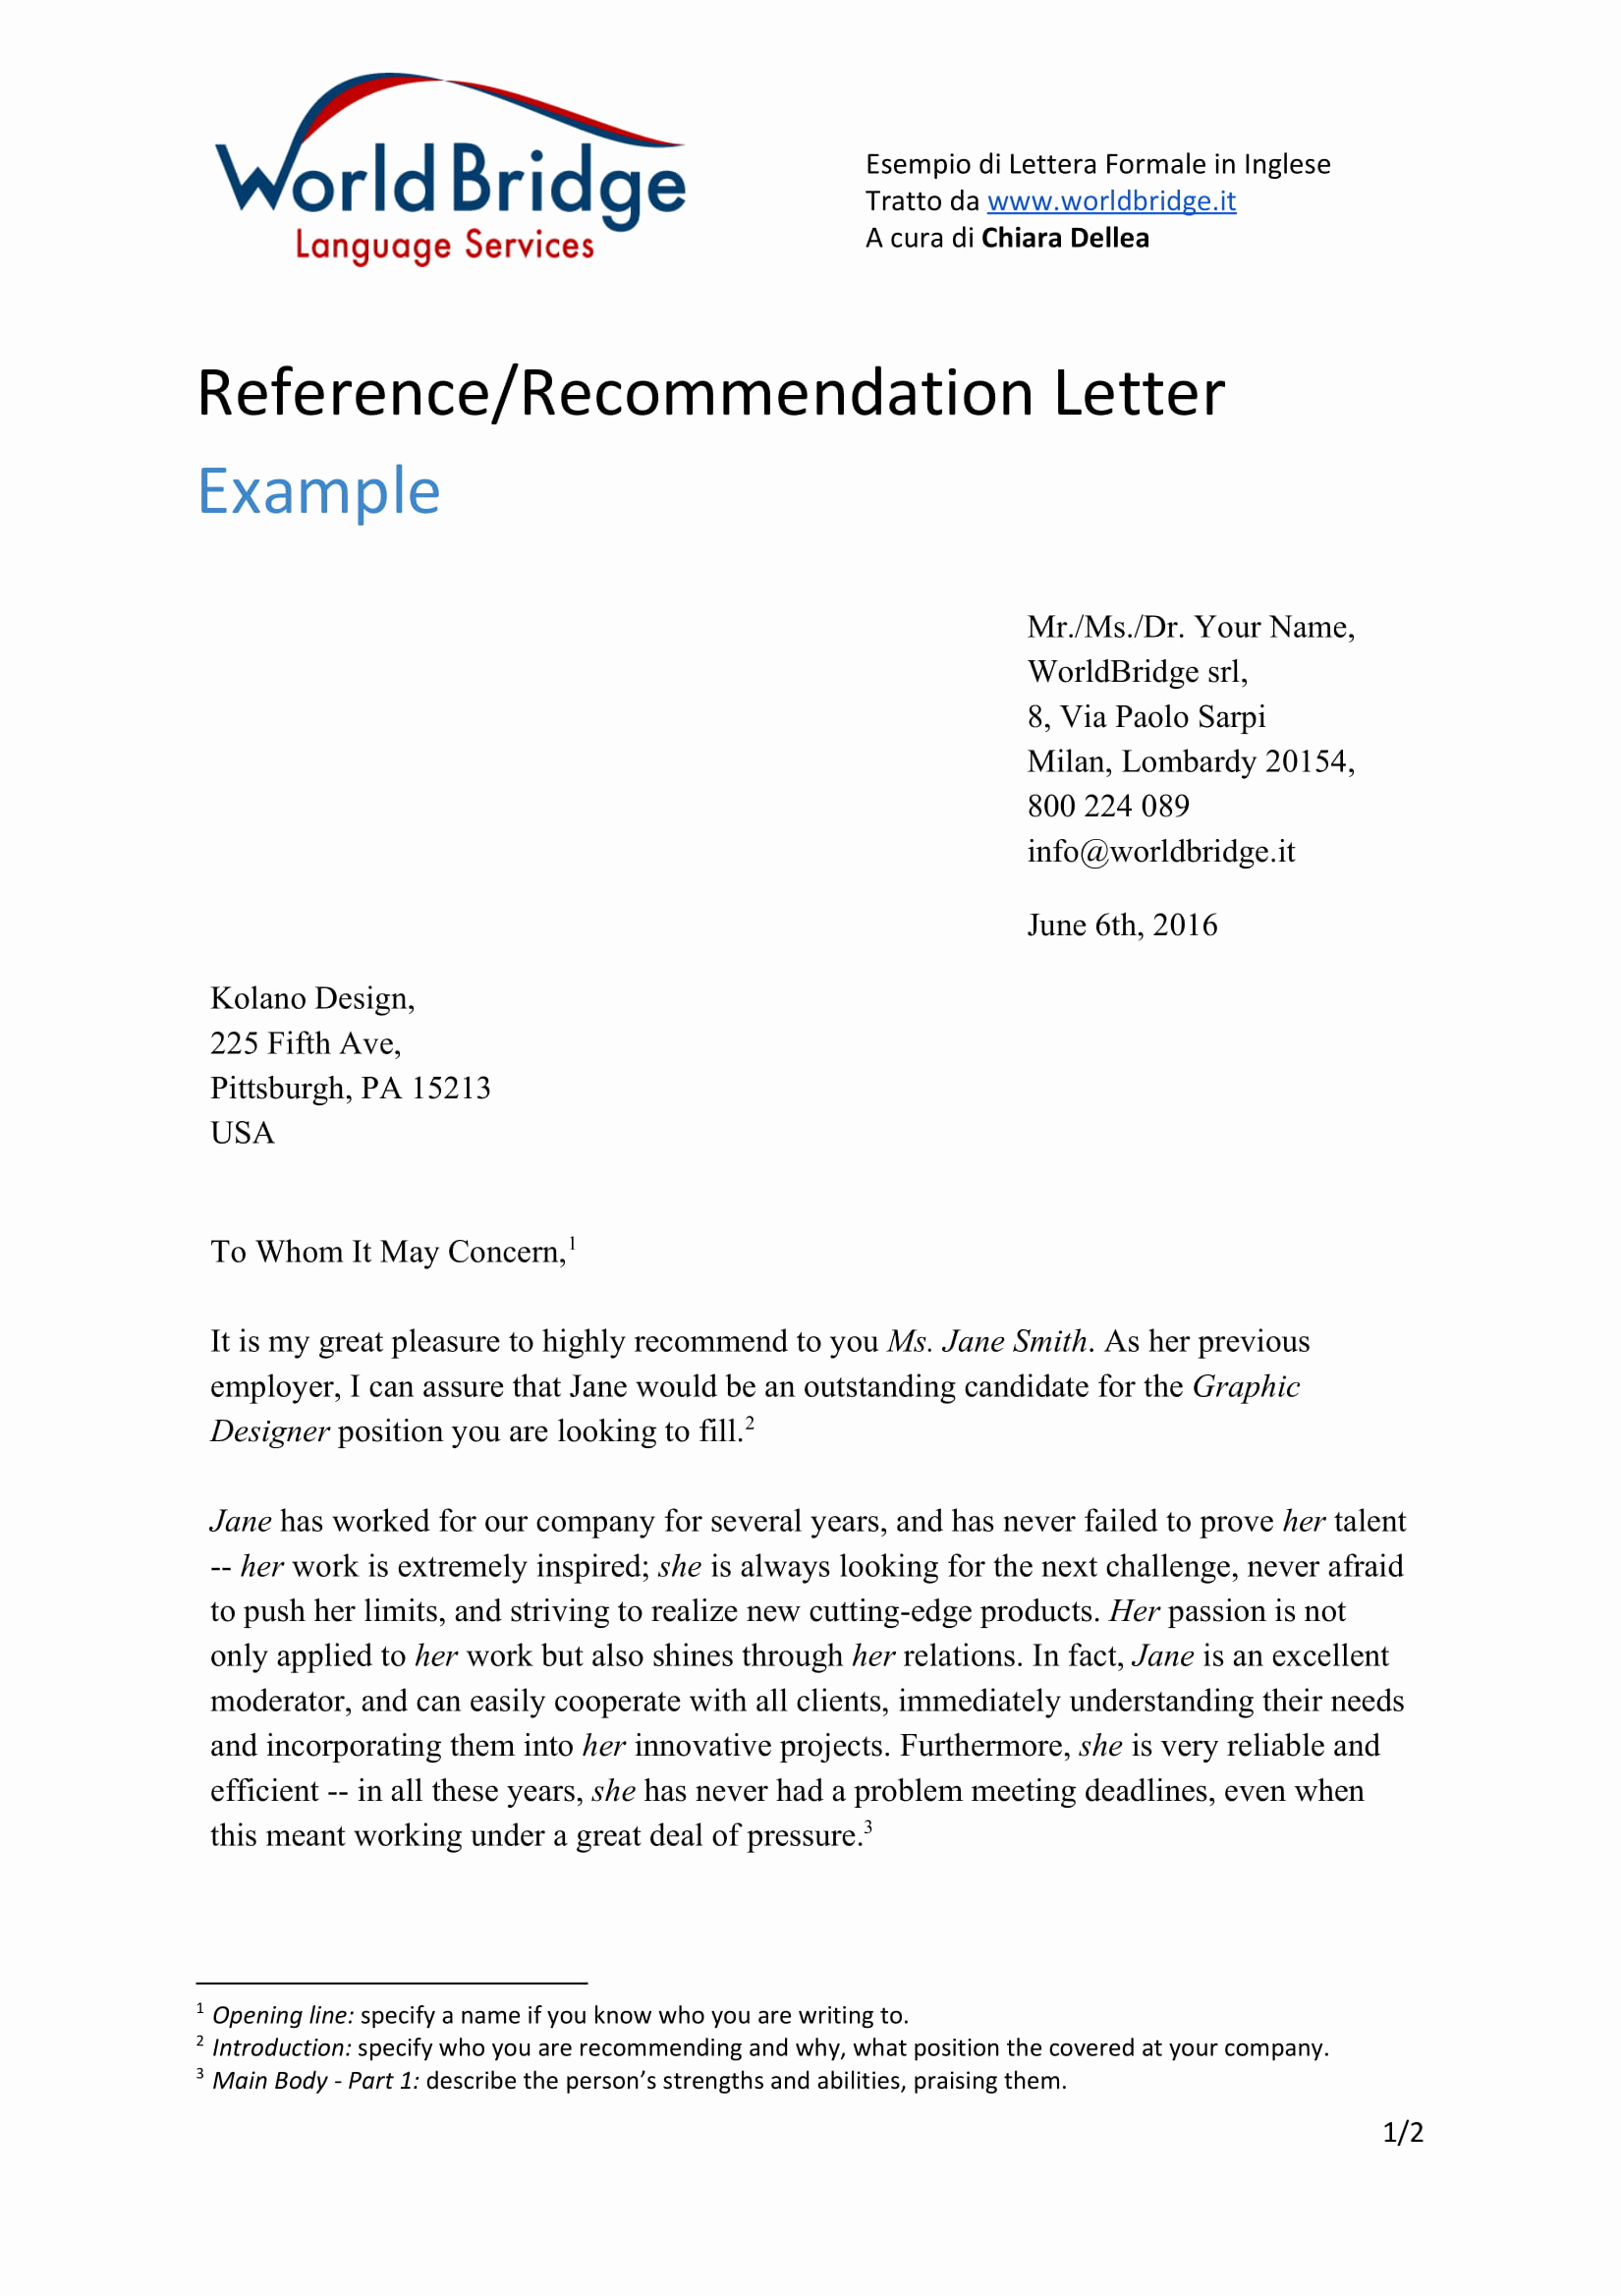 Reference Letters From Employers Beautiful 9 Reference Letter From A Previous Employer Examples